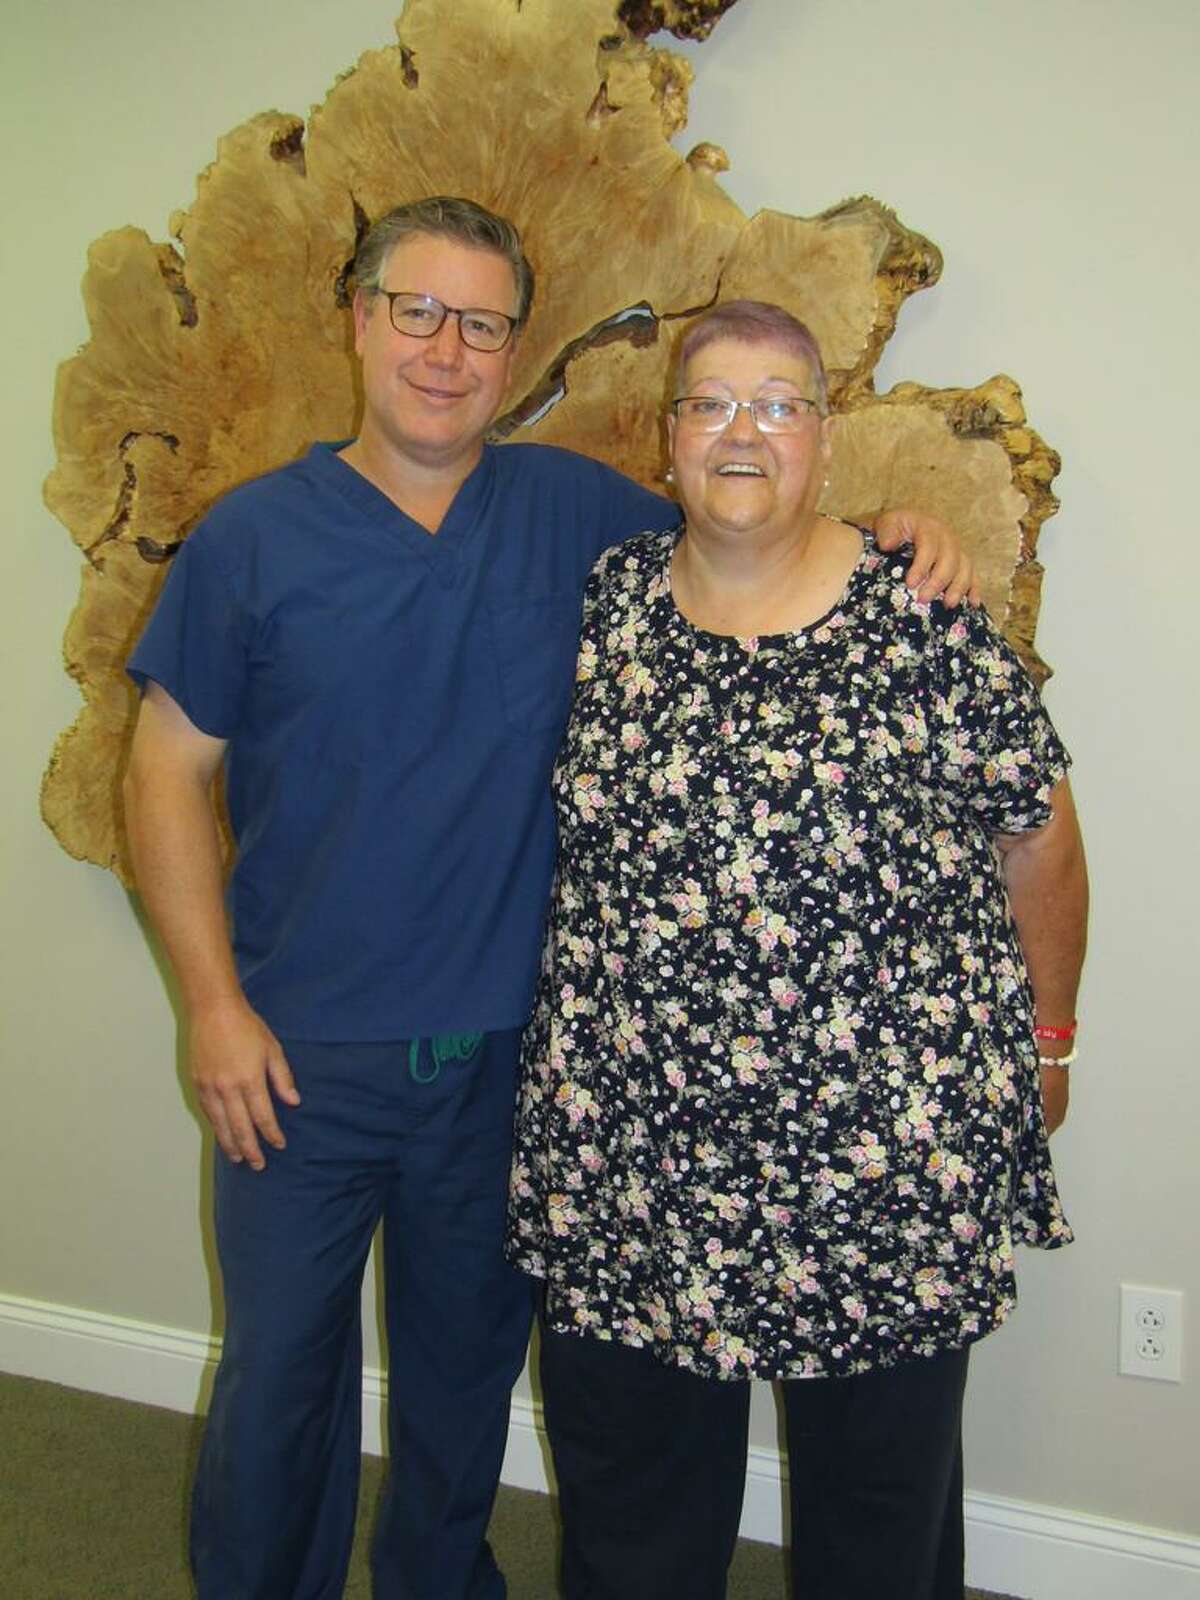 From left, Marshall Kurtz and New Milford resident Concetta "Connie" Main reunited in Greater Connecticut Oral & Dental Implant Surgery's New Milford office on July 19, over a month since Main's restorative dental surgery.